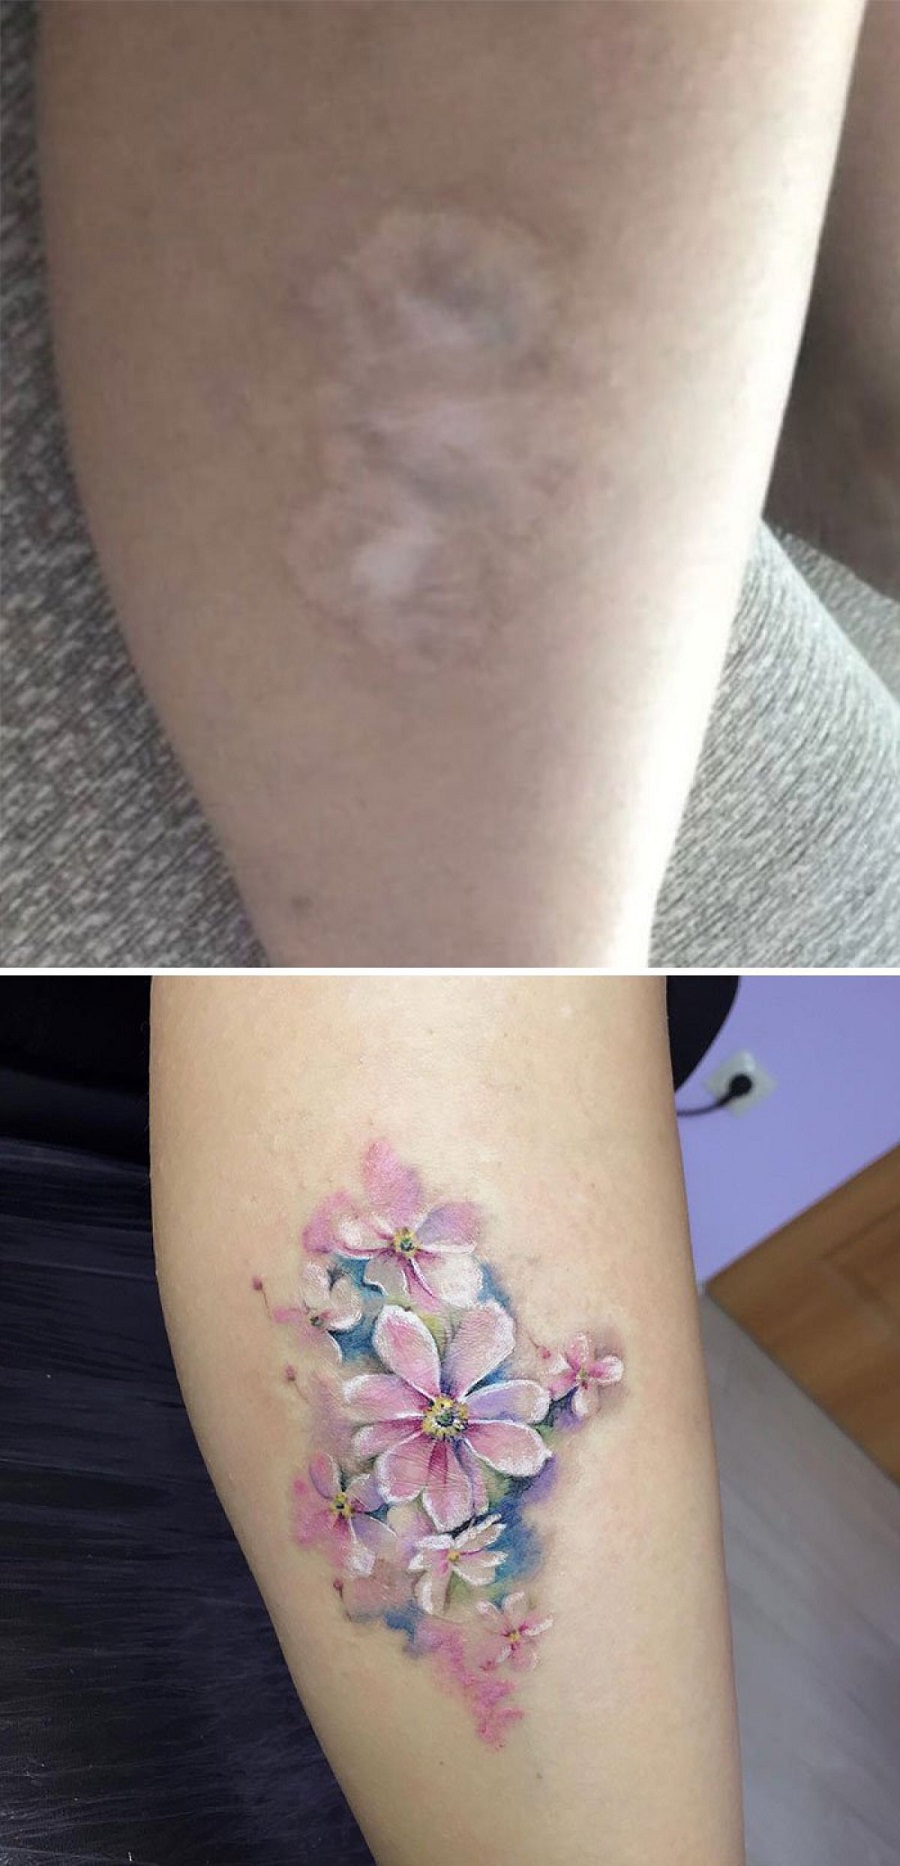 Scars-And-Birthmarks-Tattoo-Cover-ups